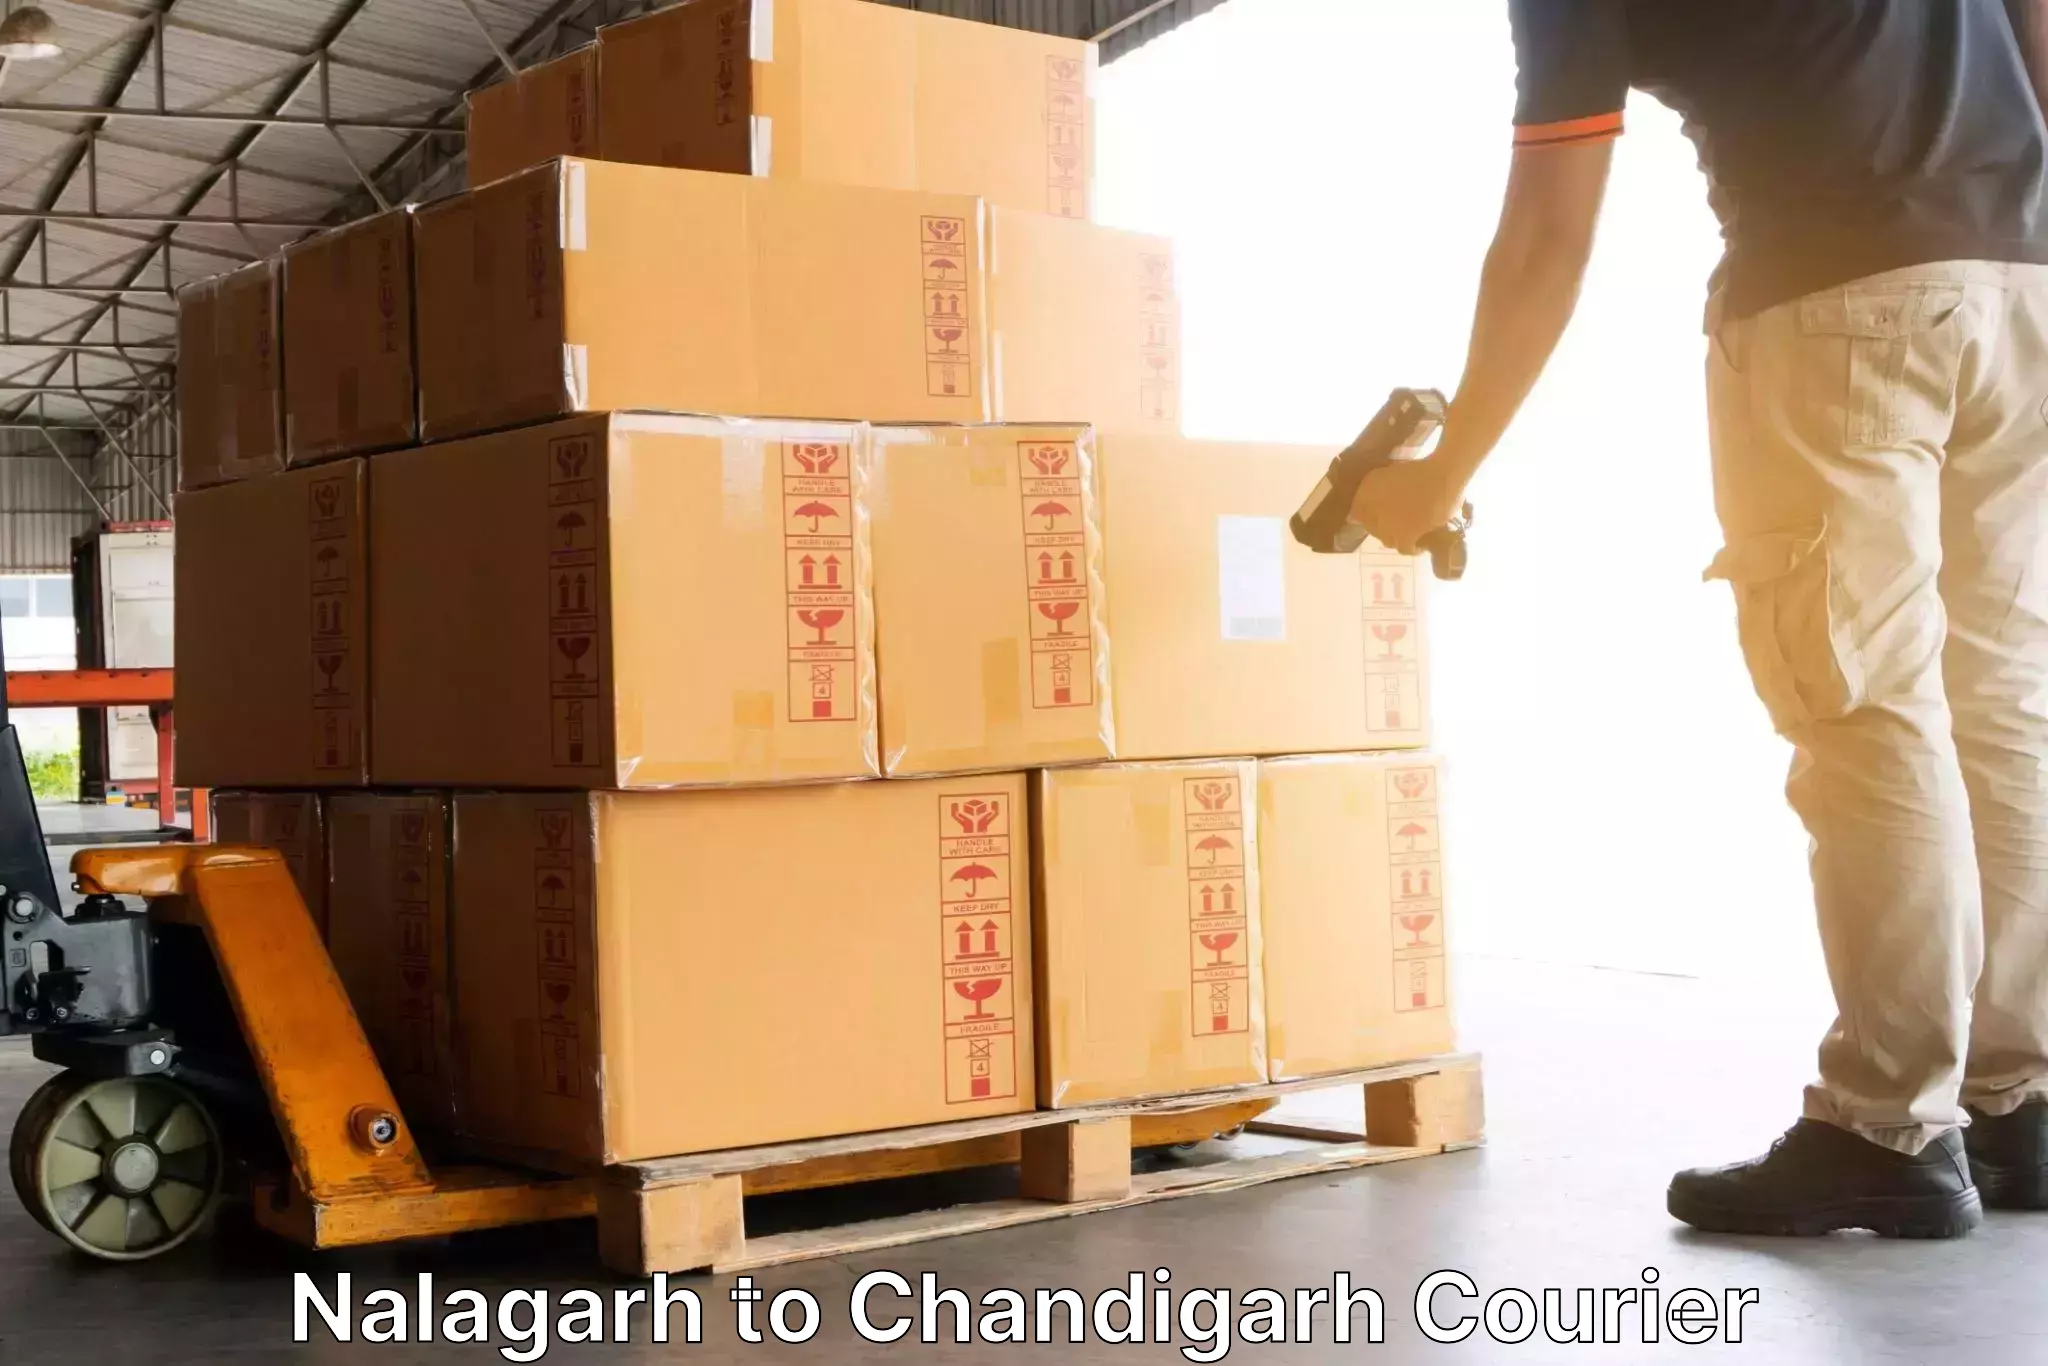 Multi-national courier services Nalagarh to Chandigarh